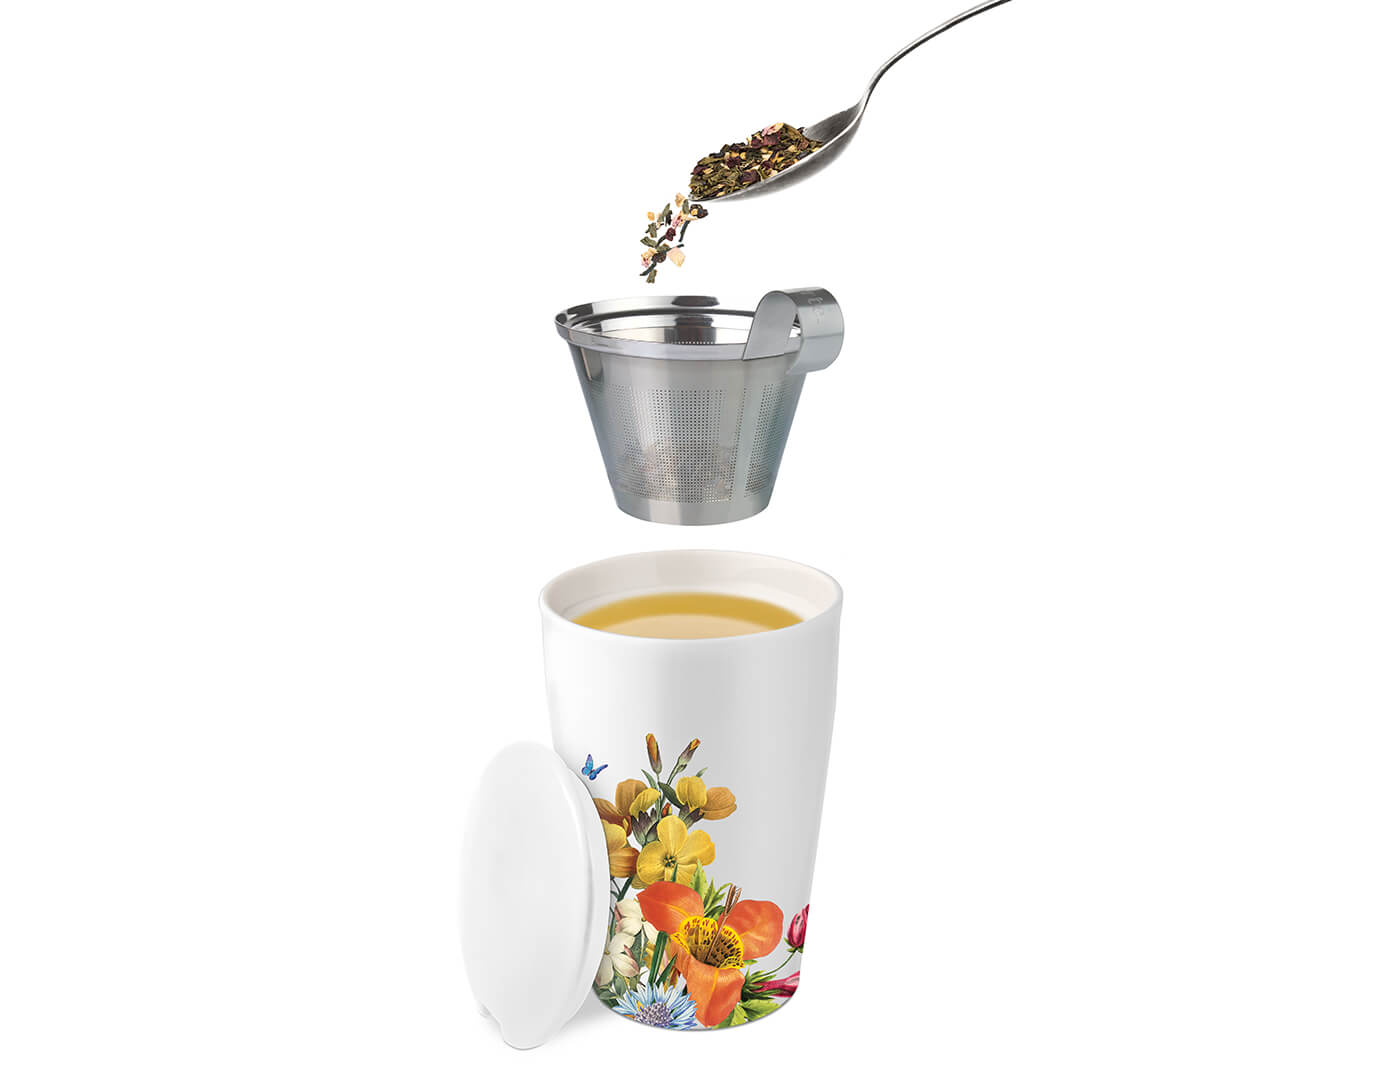 Jubilee Kati Steeping Cup, open with lid off, and tea being added from above to the infuser